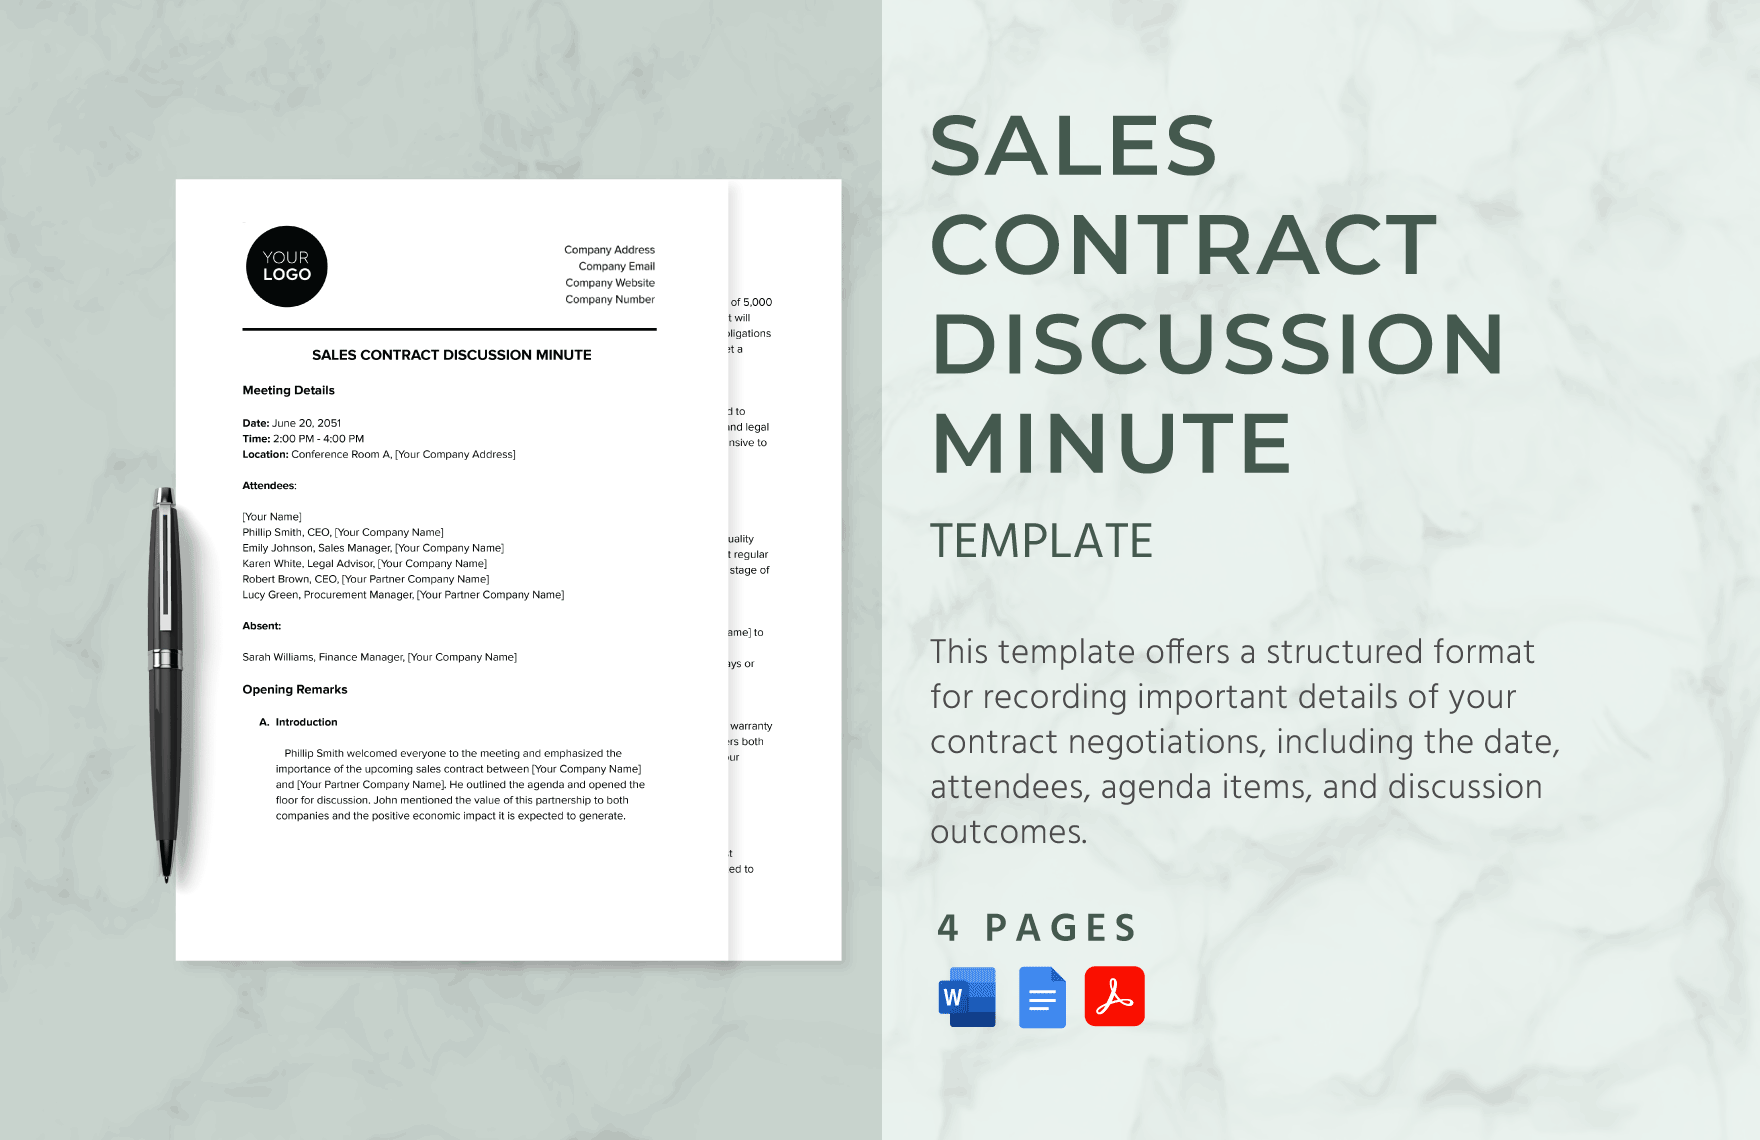 Sales Contract Discussion Minute Template in Word, Google Docs, PDF